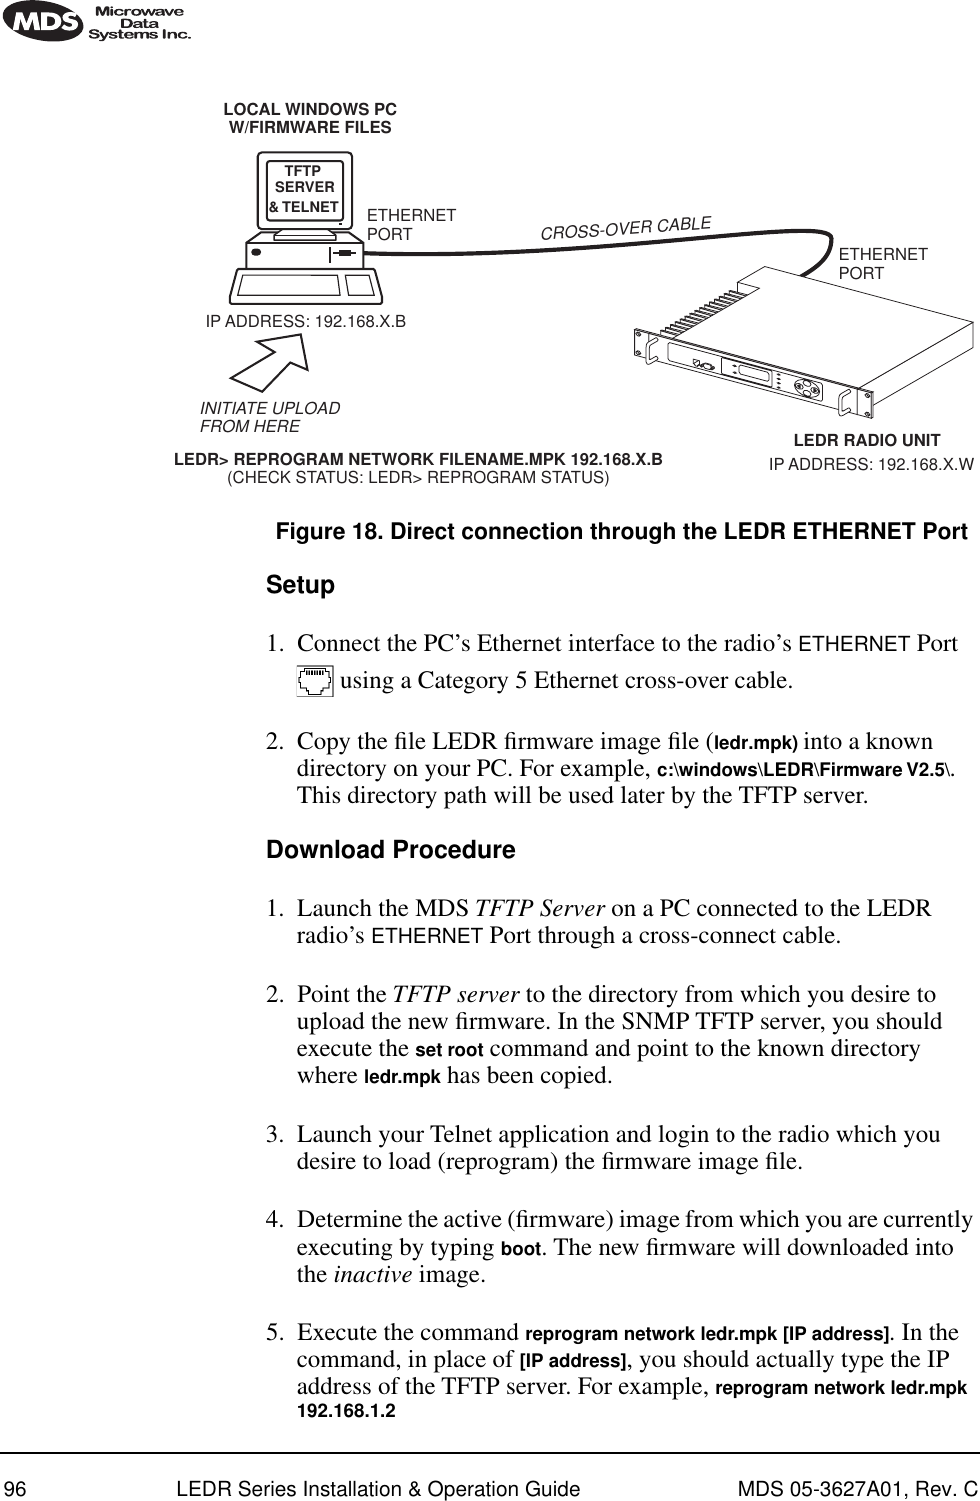 96 LEDR Series Installation &amp; Operation Guide MDS 05-3627A01, Rev. CInvisible place holderFigure 18. Direct connection through the LEDR ETHERNET PortSetup1. Connect the PC’s Ethernet interface to the radio’s ETHERNET Port  using a Category 5 Ethernet cross-over cable.2. Copy the ﬁle LEDR ﬁrmware image ﬁle (ledr.mpk) into a known directory on your PC. For example, c:\windows\LEDR\Firmware V2.5\. This directory path will be used later by the TFTP server.Download Procedure1. Launch the MDS TFTP Server on a PC connected to the LEDR radio’s ETHERNET Port through a cross-connect cable.2. Point the TFTP server to the directory from which you desire to upload the new ﬁrmware. In the SNMP TFTP server, you should execute the set root command and point to the known directory where ledr.mpk has been copied.3. Launch your Telnet application and login to the radio which you desire to load (reprogram) the ﬁrmware image ﬁle.4. Determine the active (ﬁrmware) image from which you are currently executing by typing boot. The new ﬁrmware will downloaded into the inactive image. 5. Execute the command reprogram network ledr.mpk [IP address]. In the command, in place of [IP address], you should actually type the IP address of the TFTP server. For example, reprogram network ledr.mpk 192.168.1.2&amp; TELNET ETHERNETPORTINITIATE UPLOADFROM HERELEDR RADIO UNITLOCAL WINDOWS PCW/FIRMWARE FILESETHERNETPORTLEDR&gt; REPROGRAM NETWORK FILENAME.MPK 192.168.X.B(CHECK STATUS: LEDR&gt; REPROGRAM STATUS)IP ADDRESS: 192.168.X.BCROSS-OVER CABLEIP ADDRESS: 192.168.X.WTFTPSERVER